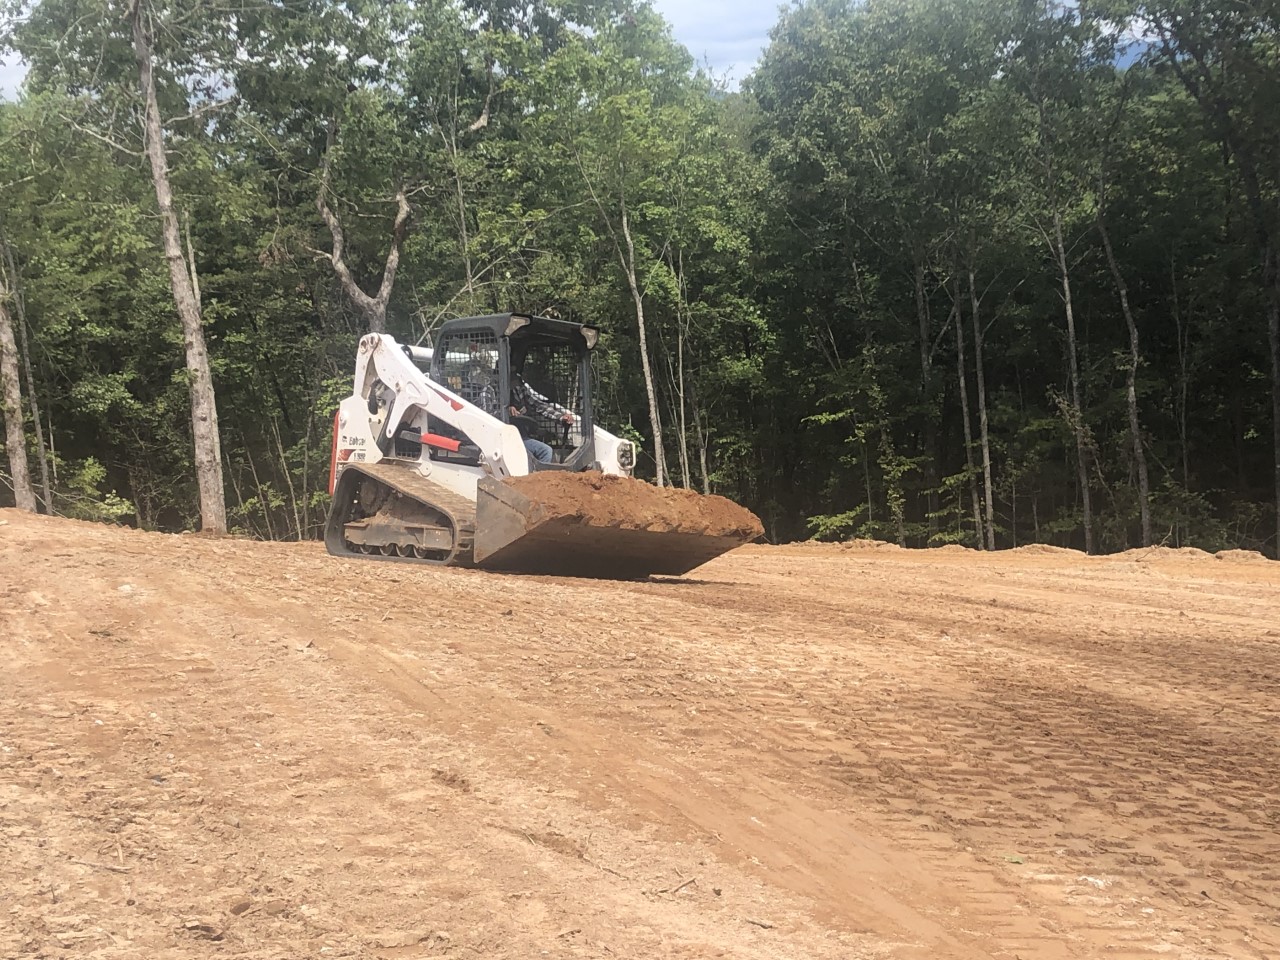 A Bobcat skid steer loader that is used to grade